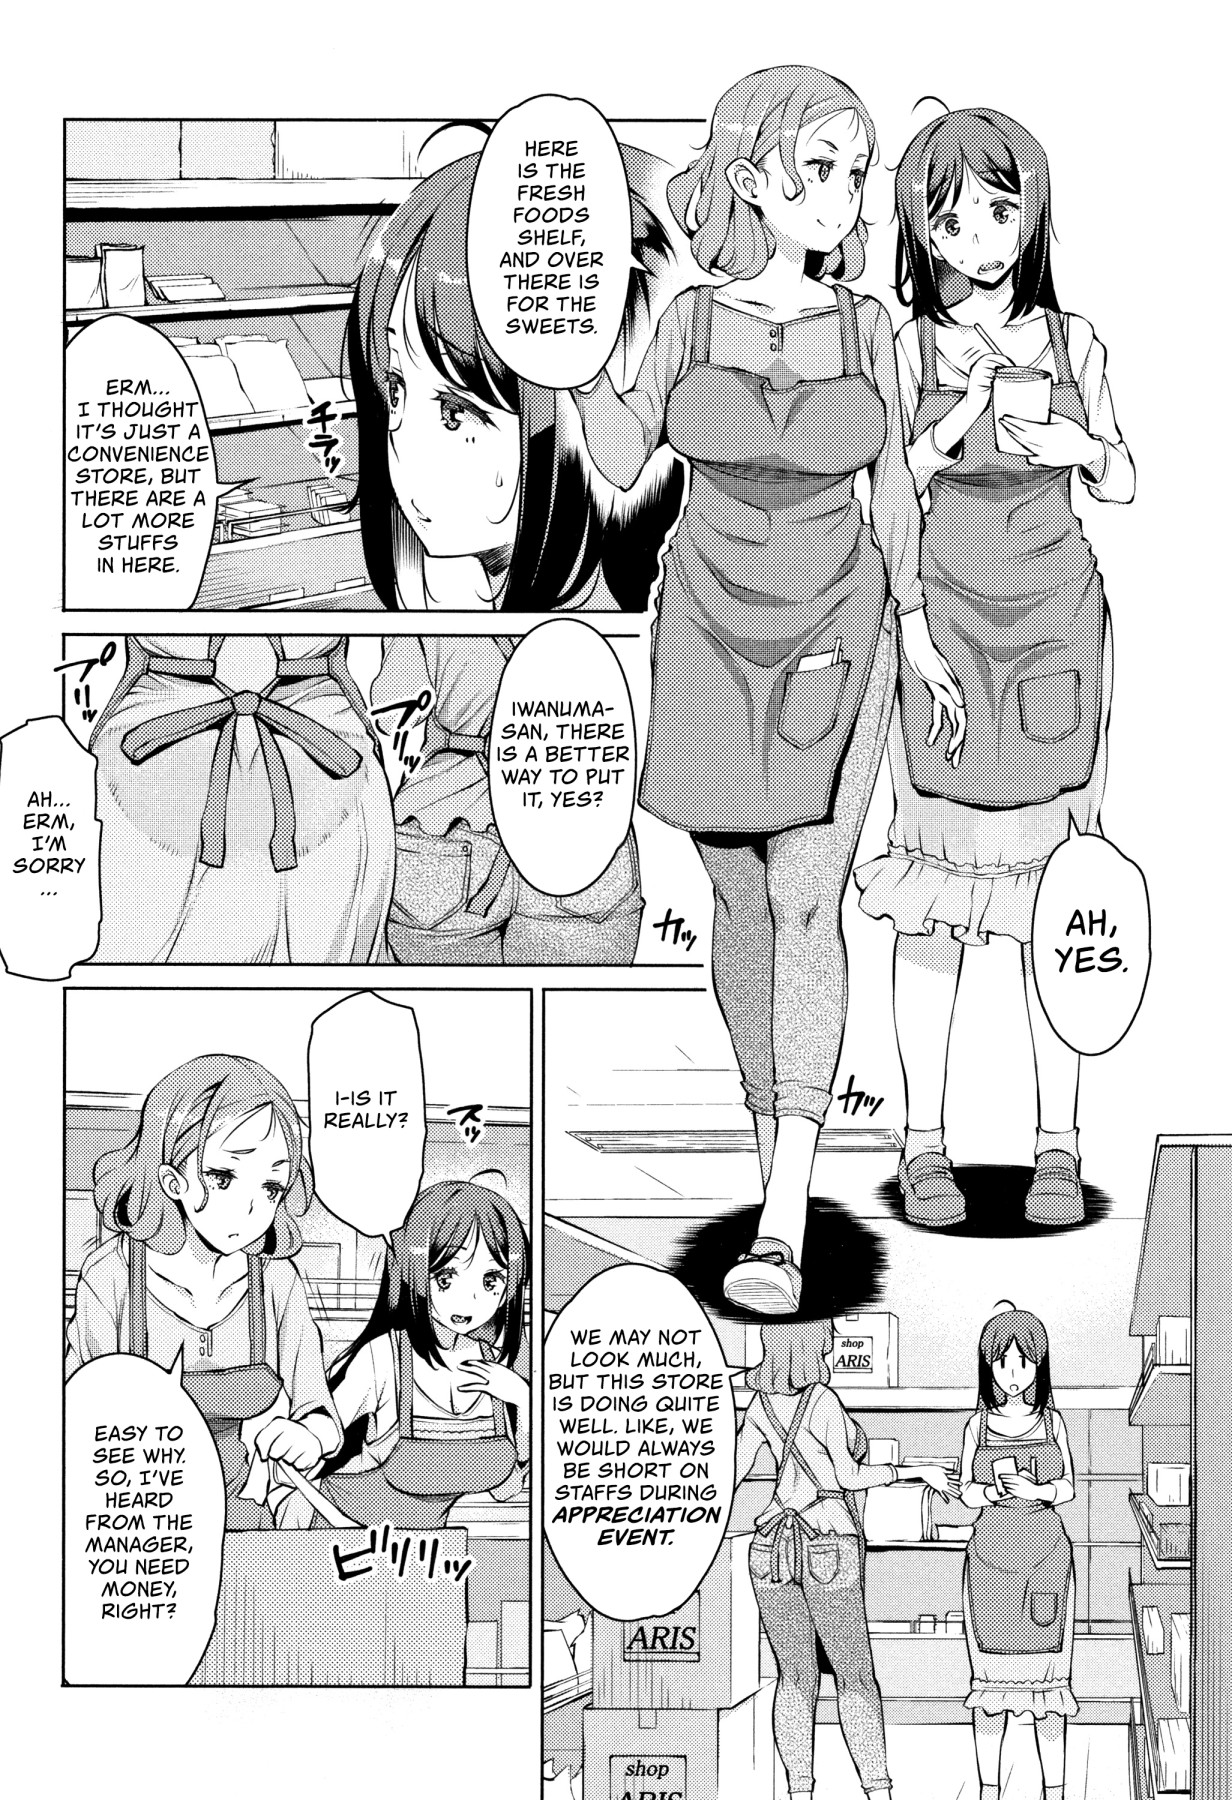 Hentai Manga Comic-End Of The Month Appreciation Event-Read-2